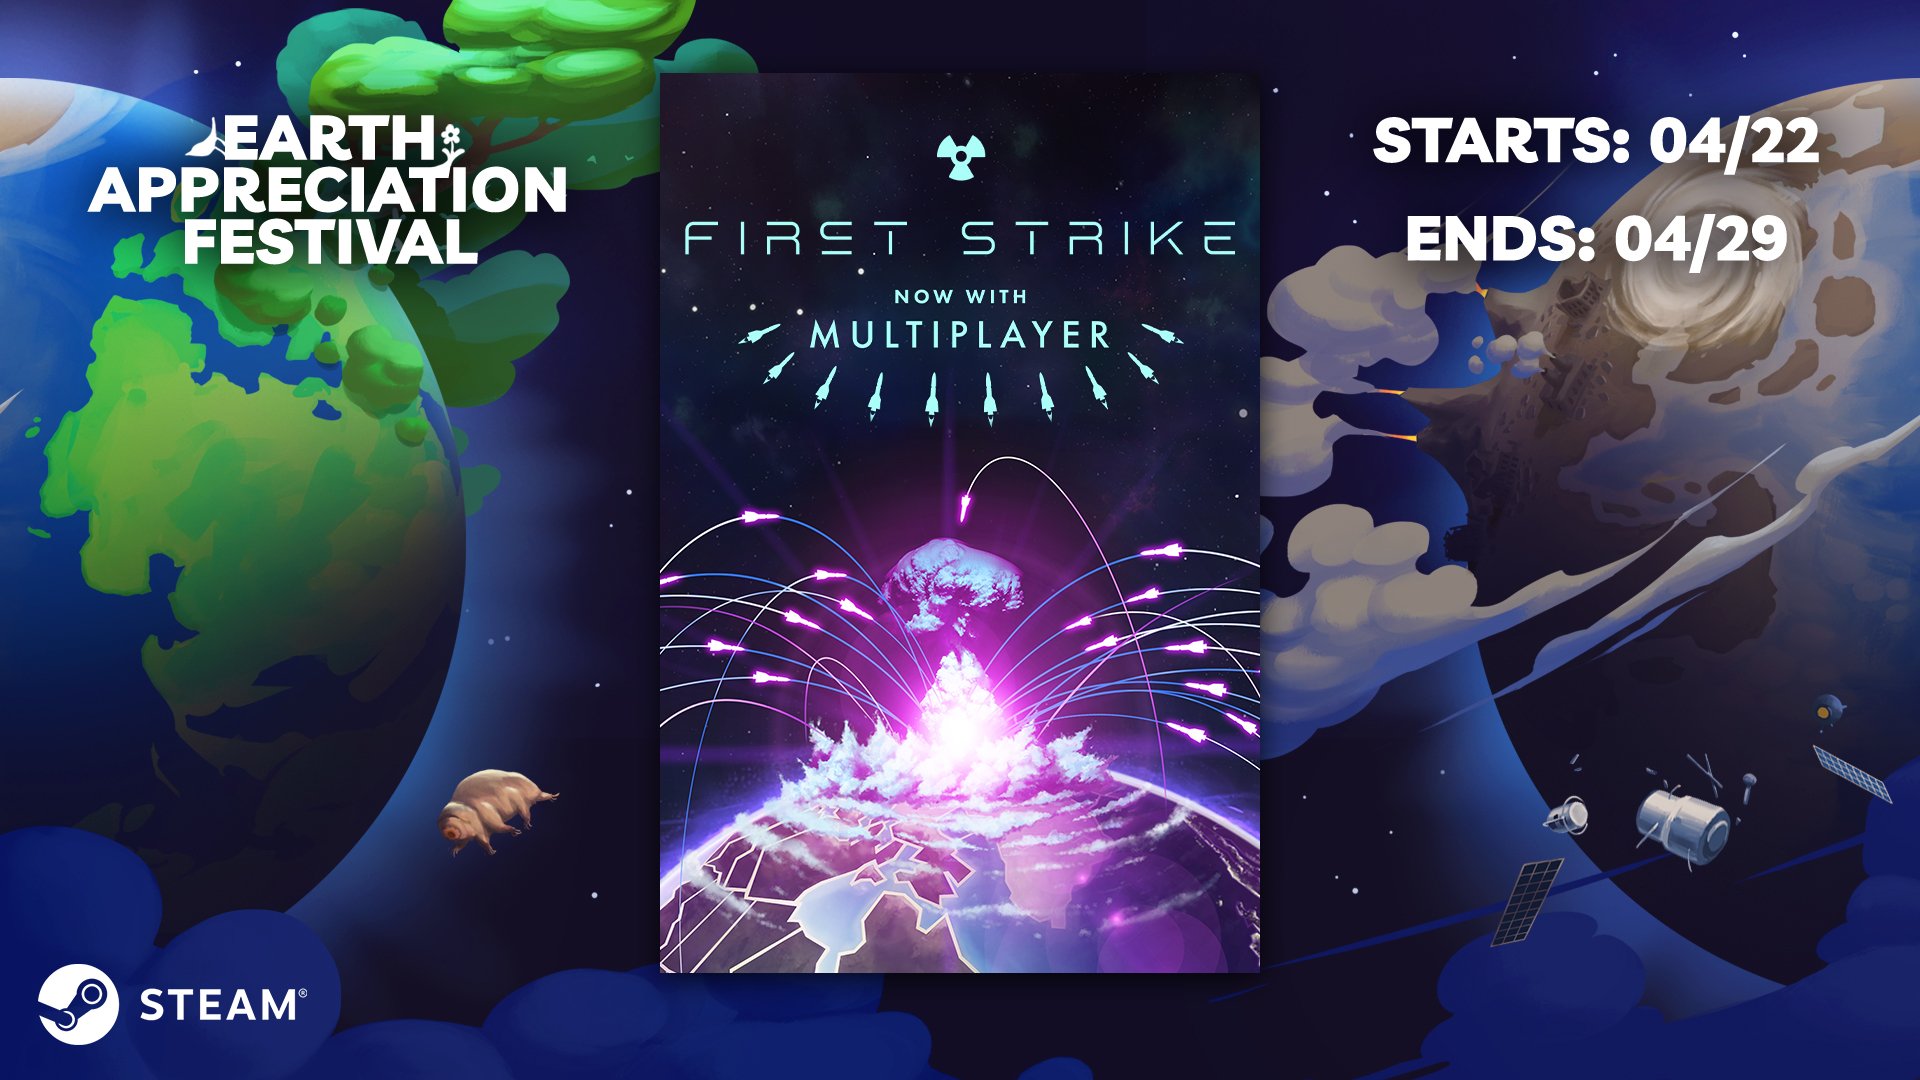 The Earth Appreciation Festival on Steam starts today! 🌍💚 And we are part of it with FIRST STRIKE which you now can get for 75% off. Our game lets you experience how devastating an all-out nuclear war would be for our mothership Earth.

Check the l